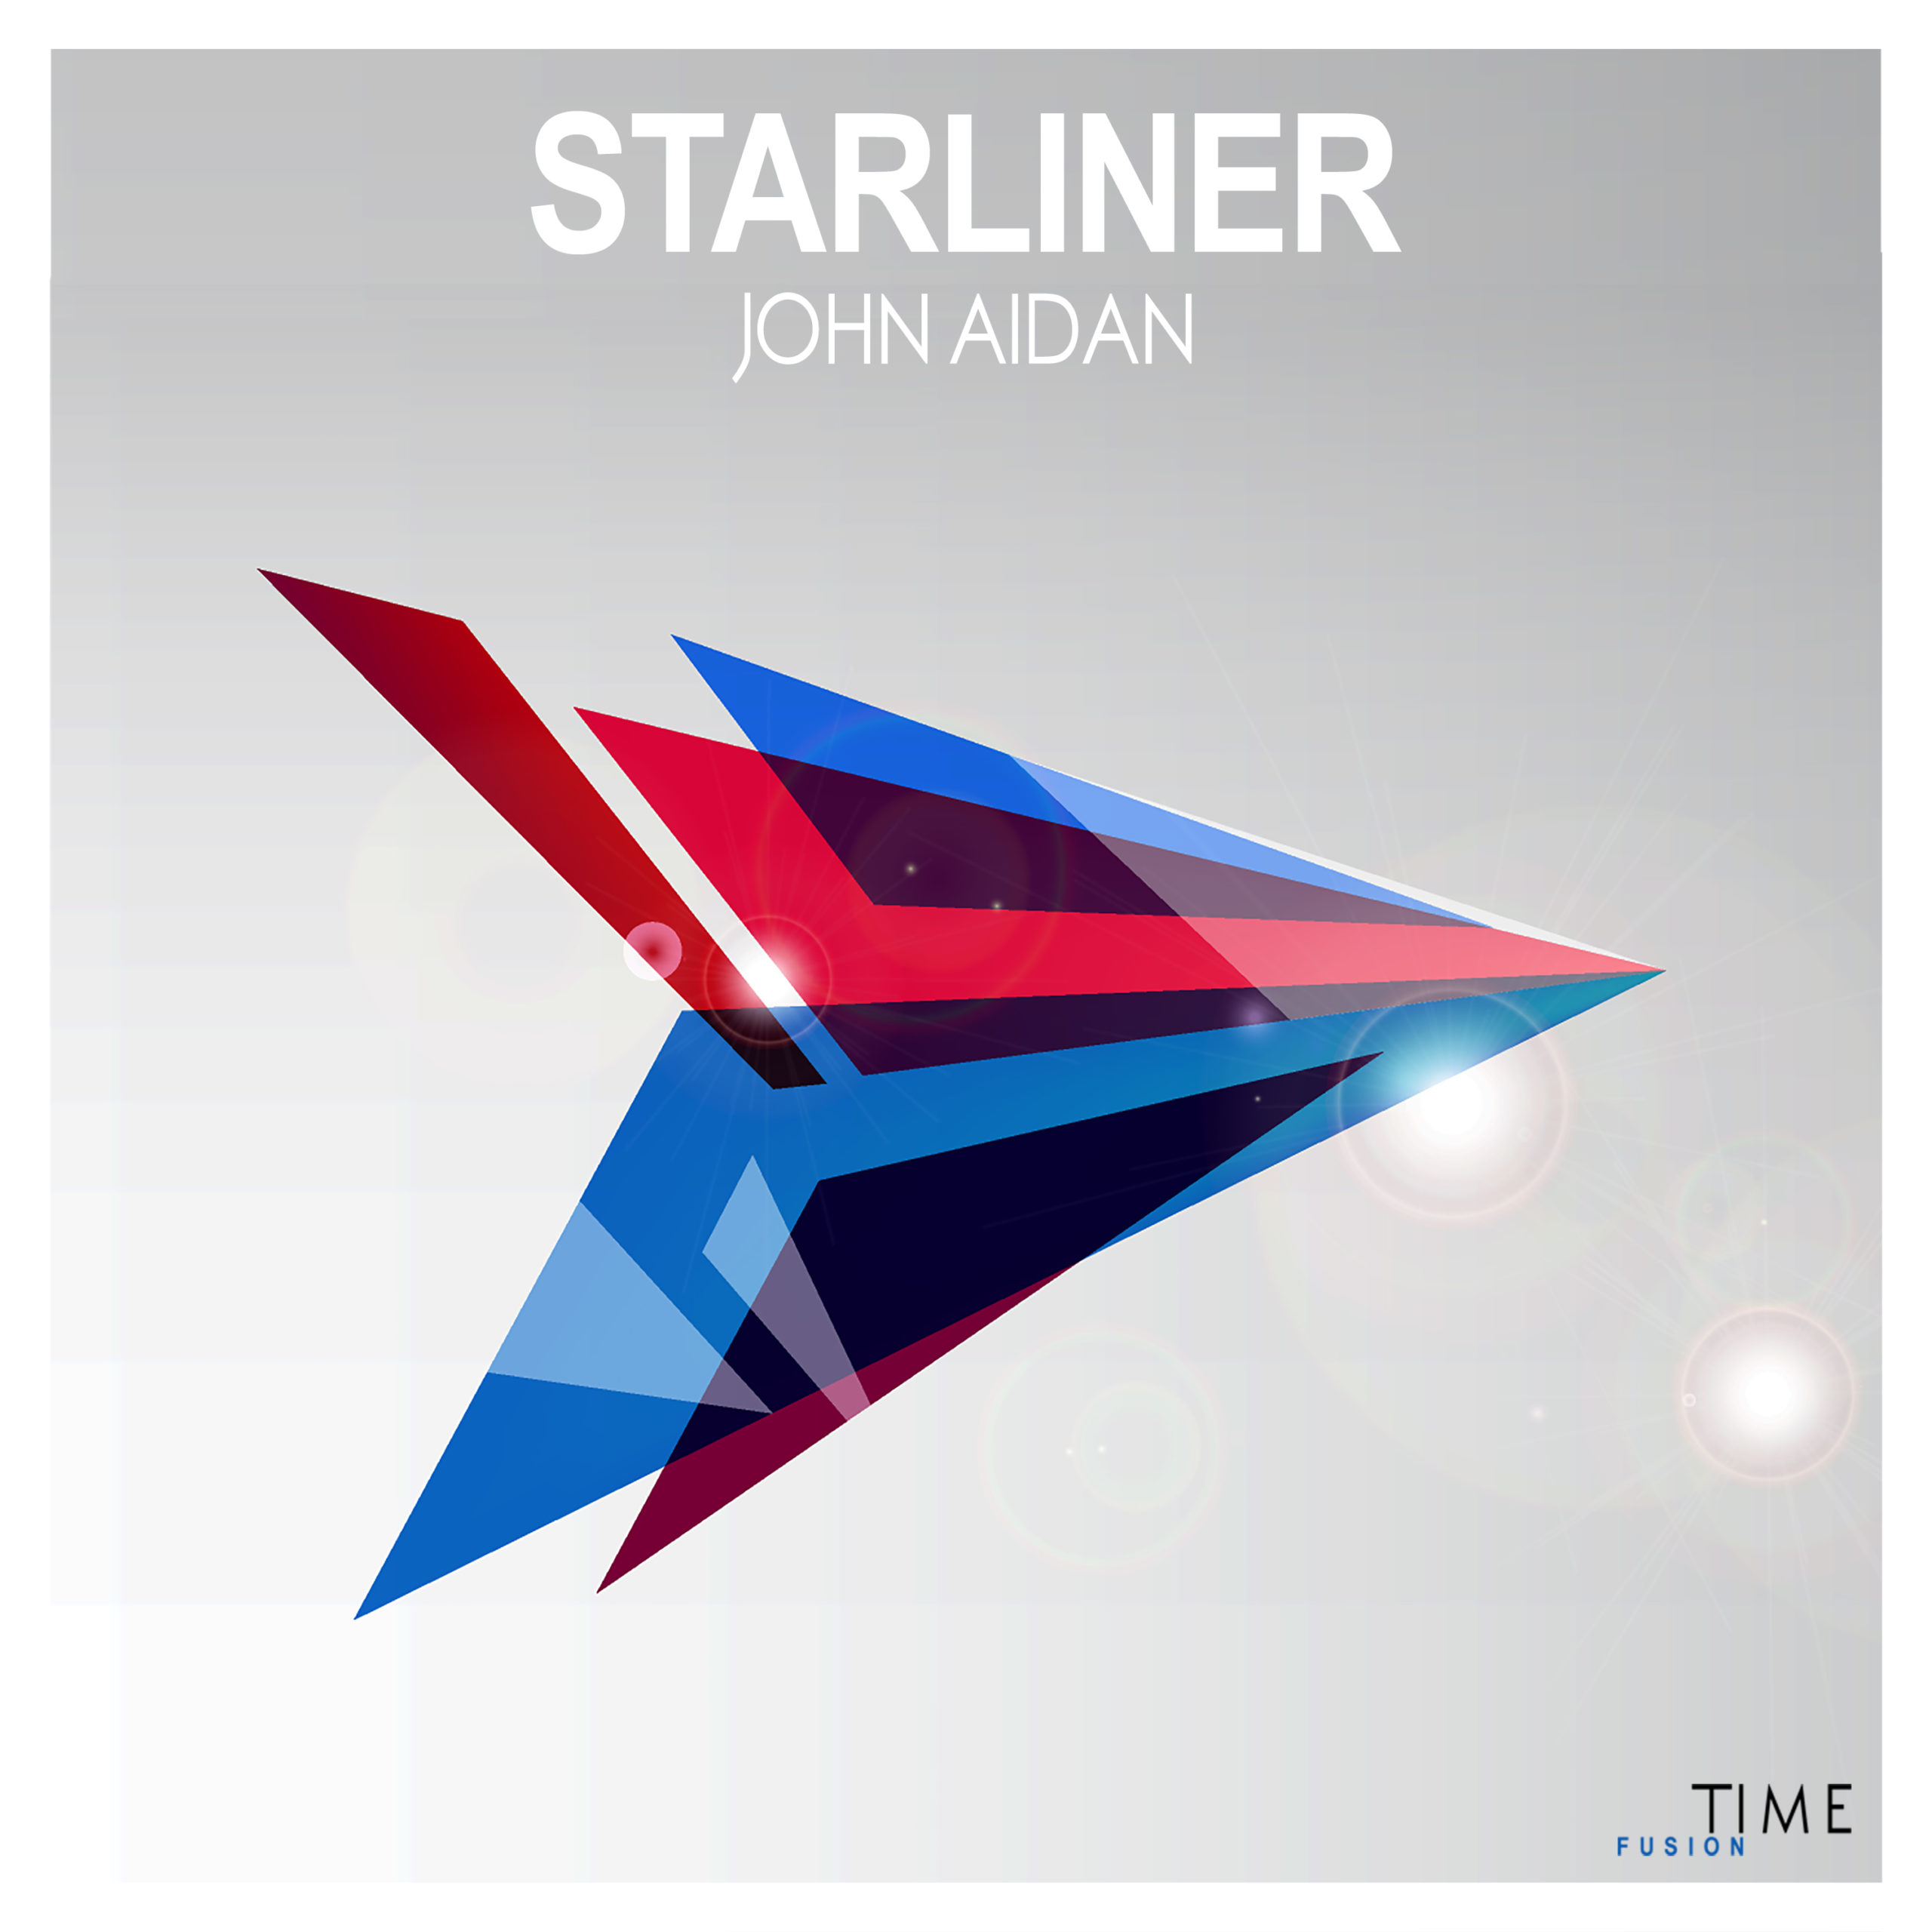 https://www.ultimate-house-records.com/wp-content/uploads/2022/04/John_Aidan-Starliner_Cover_300px-scaled.jpg